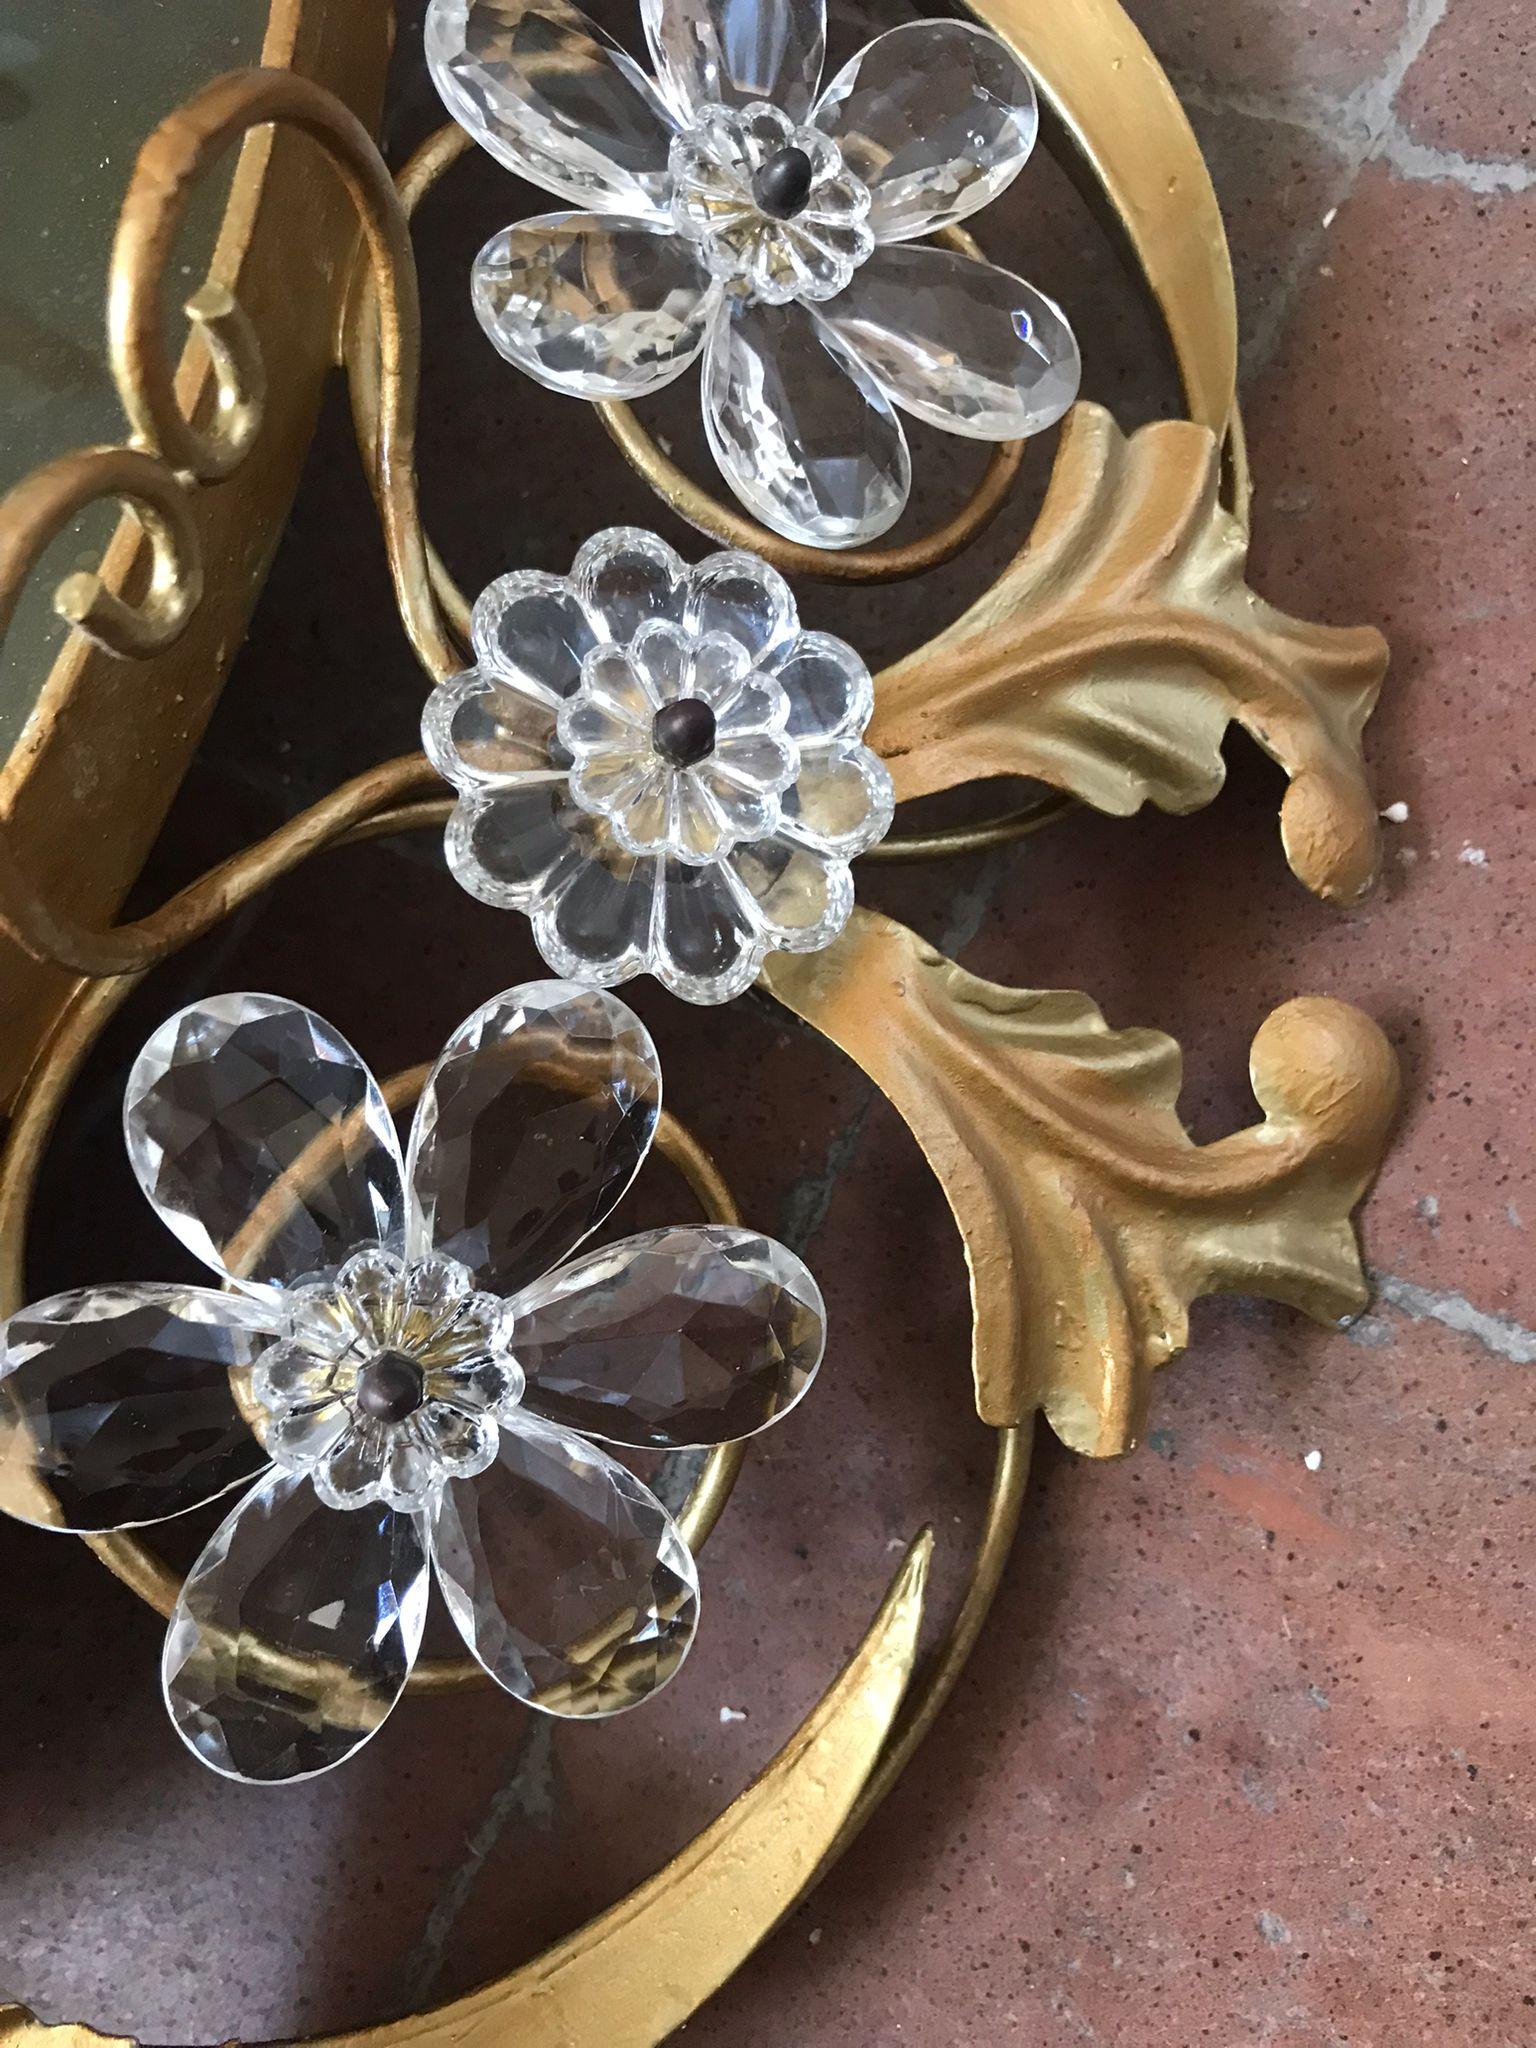 1940s French hand made gilt metal chandelier crystal bids and flowers, can be hanged either flush mount or with chain. in excellent vintage conditions

* dimensions are without chain.